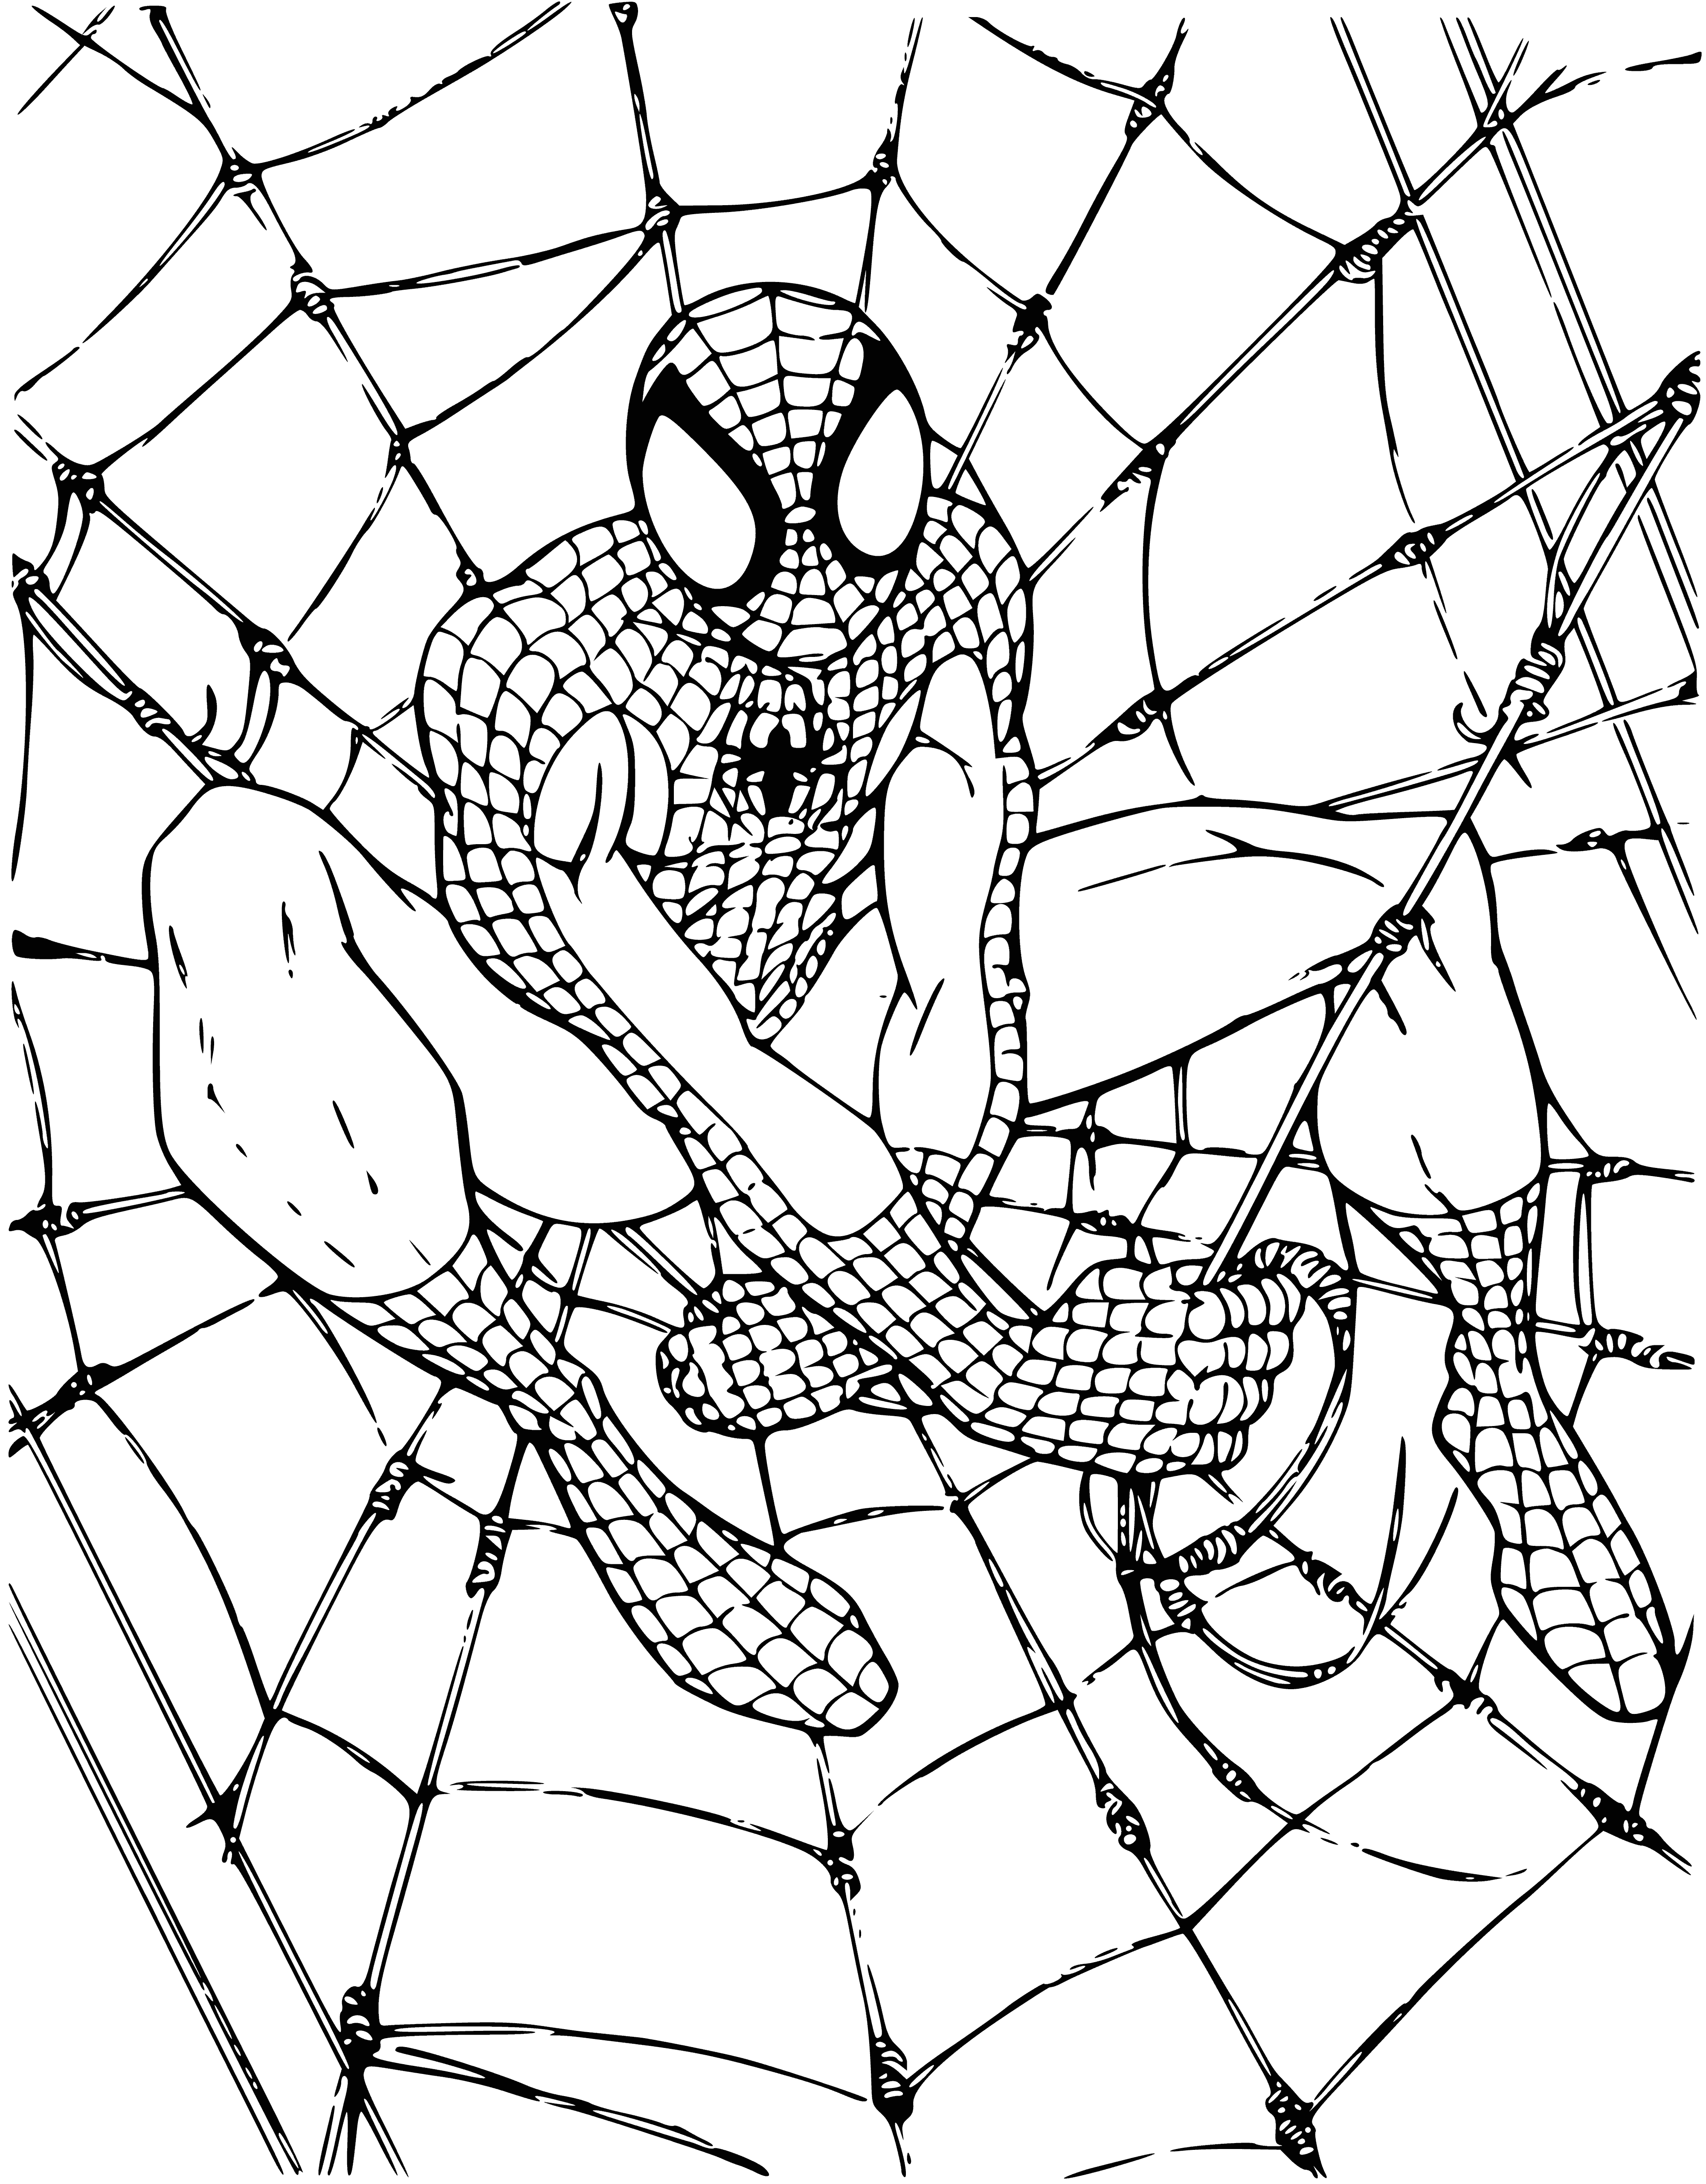 coloring page: Spiderman shoots web, wrapping enemy in sticky white web. Enemy can't get free.